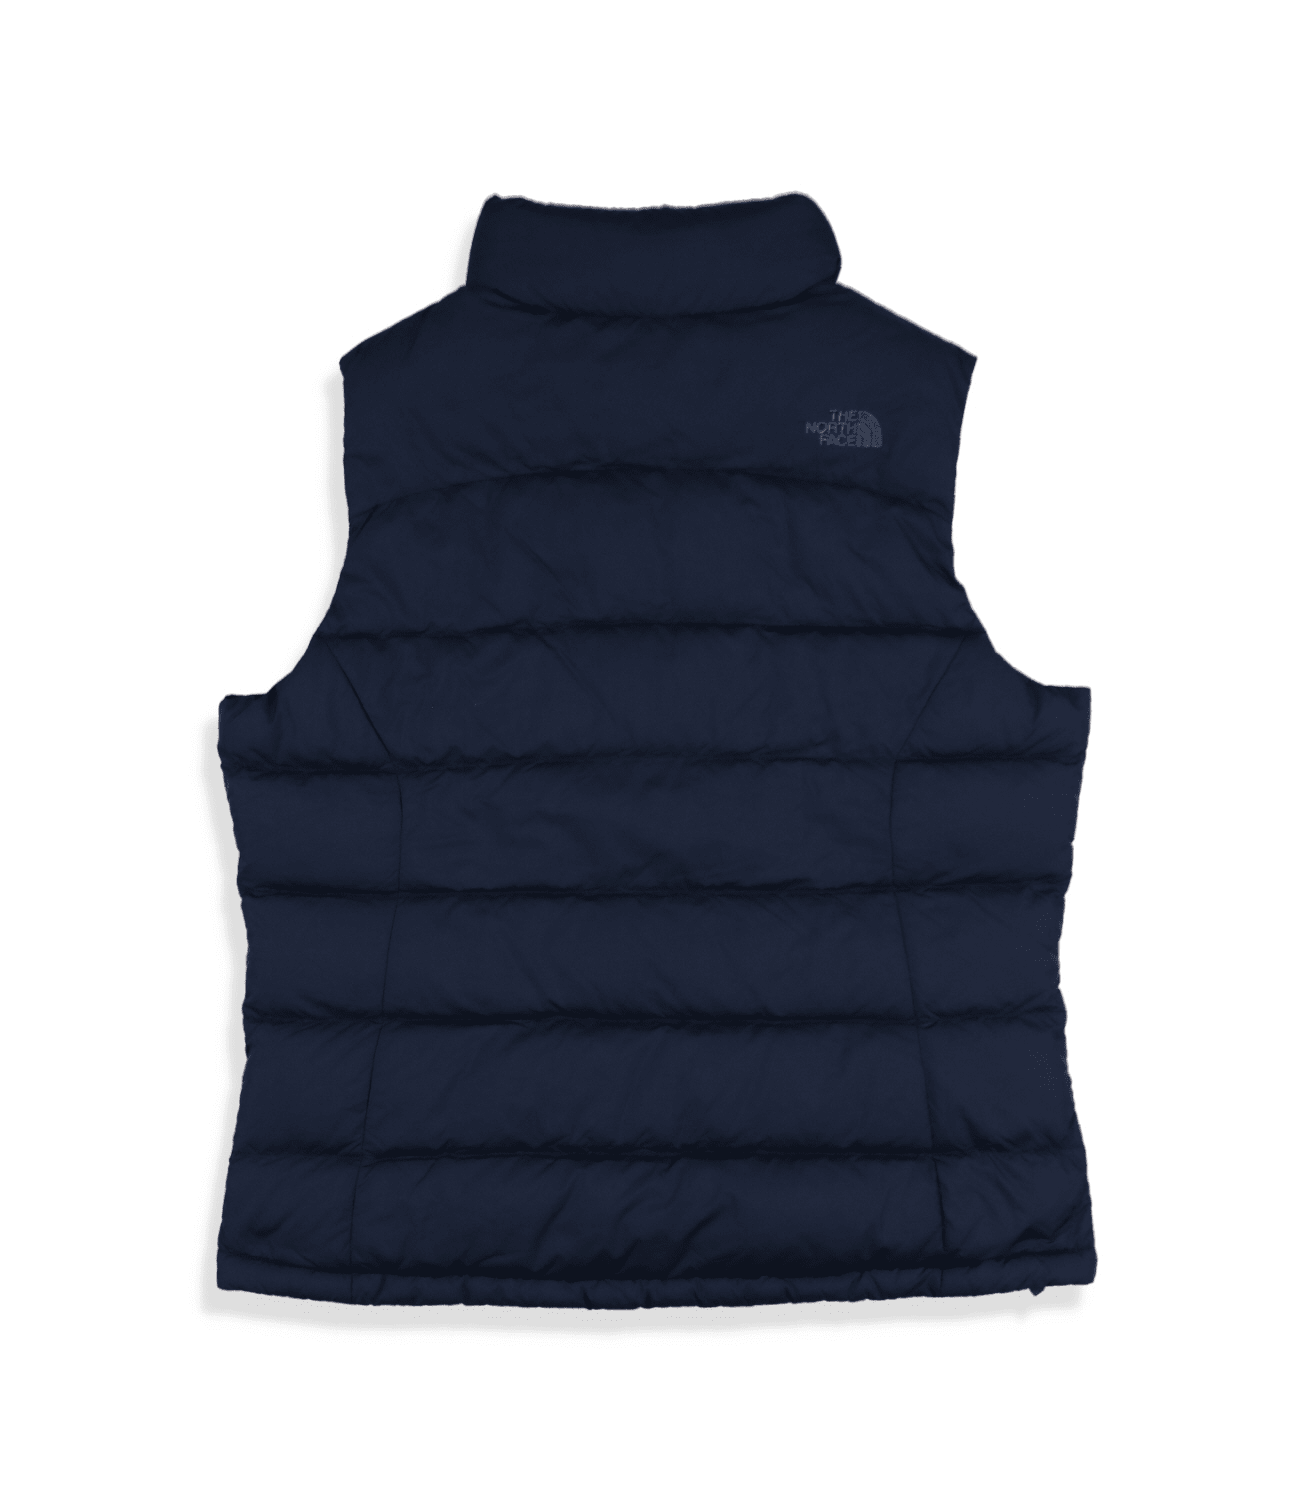 W NUPTSE 2 VEST | The North Face | The North Face Renewed